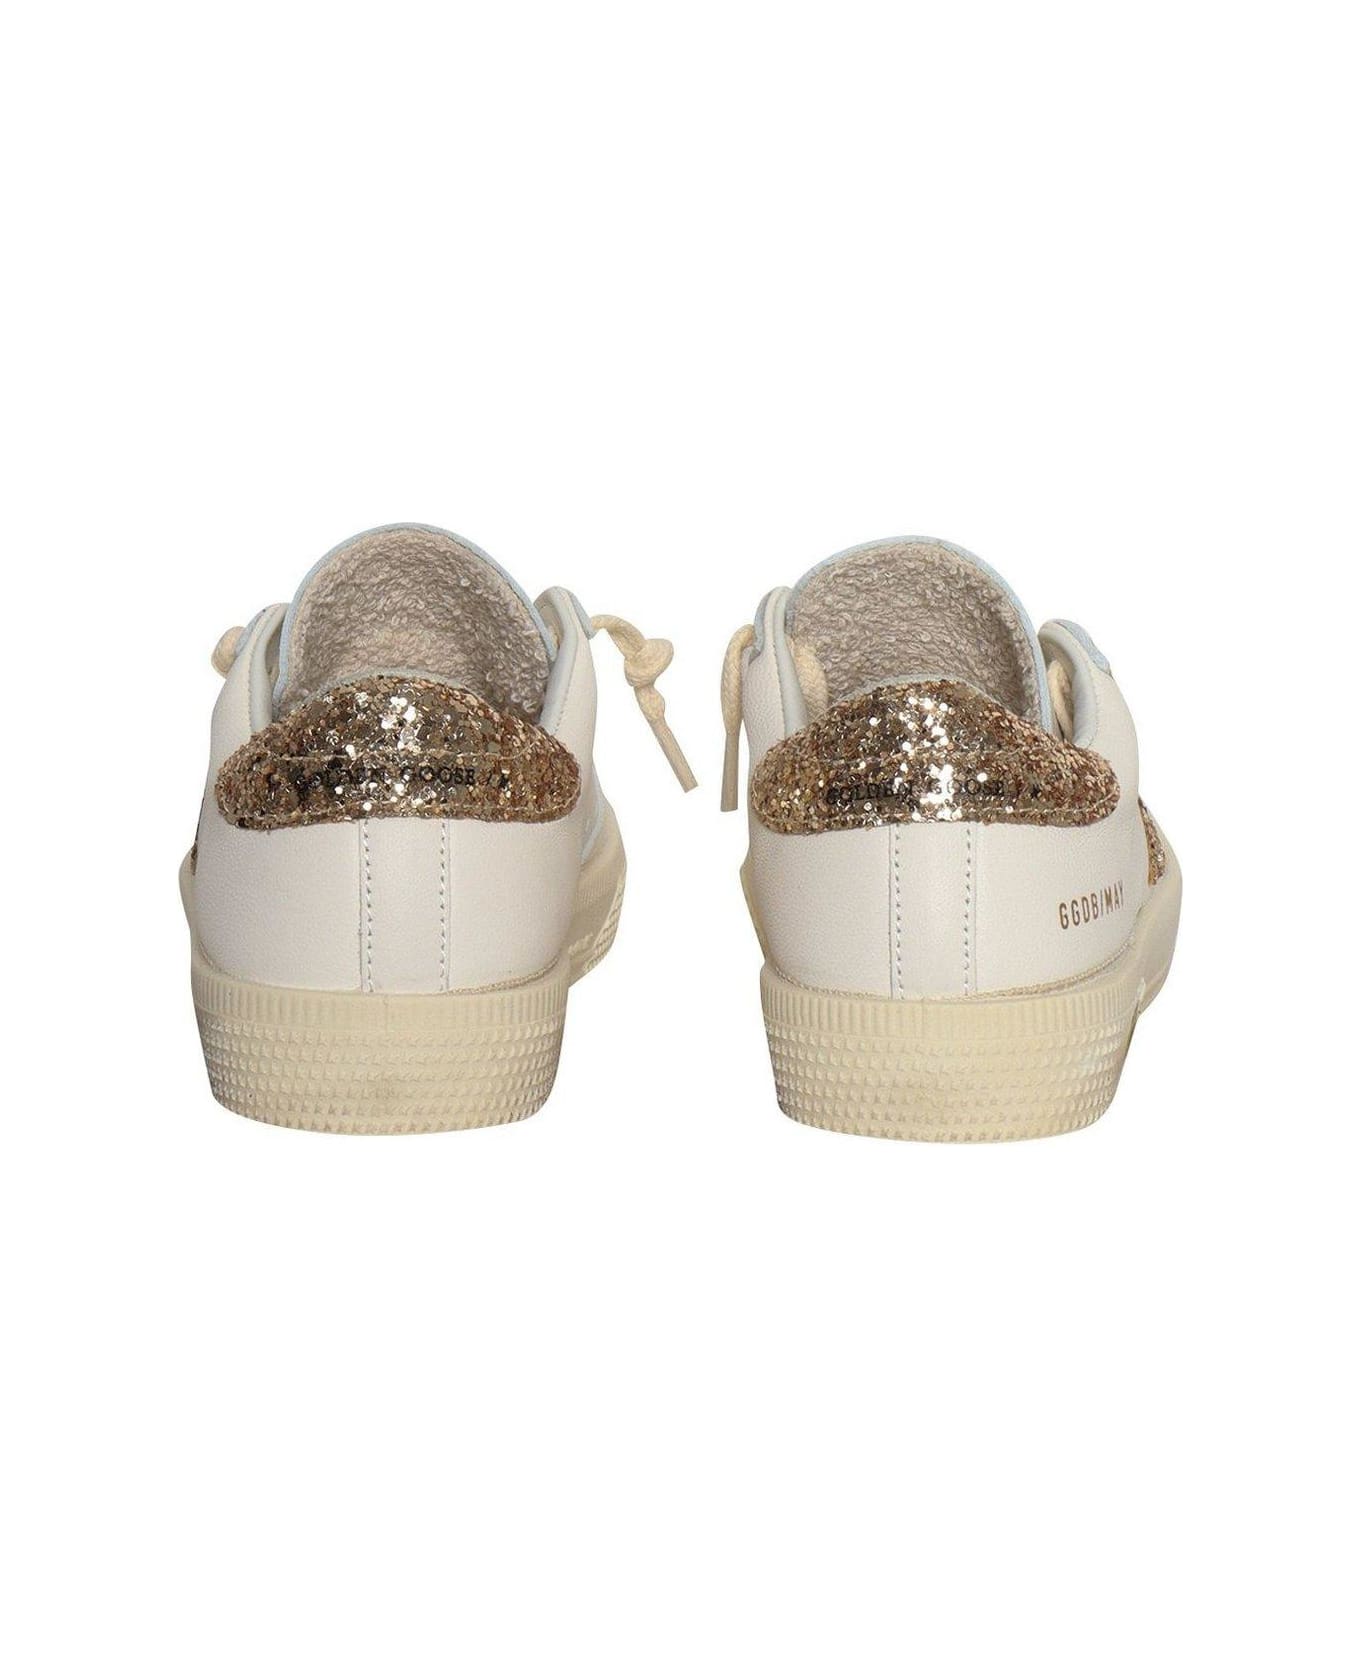 Golden Goose May Star Distressed Low-top Sneakers - White Gold シューズ